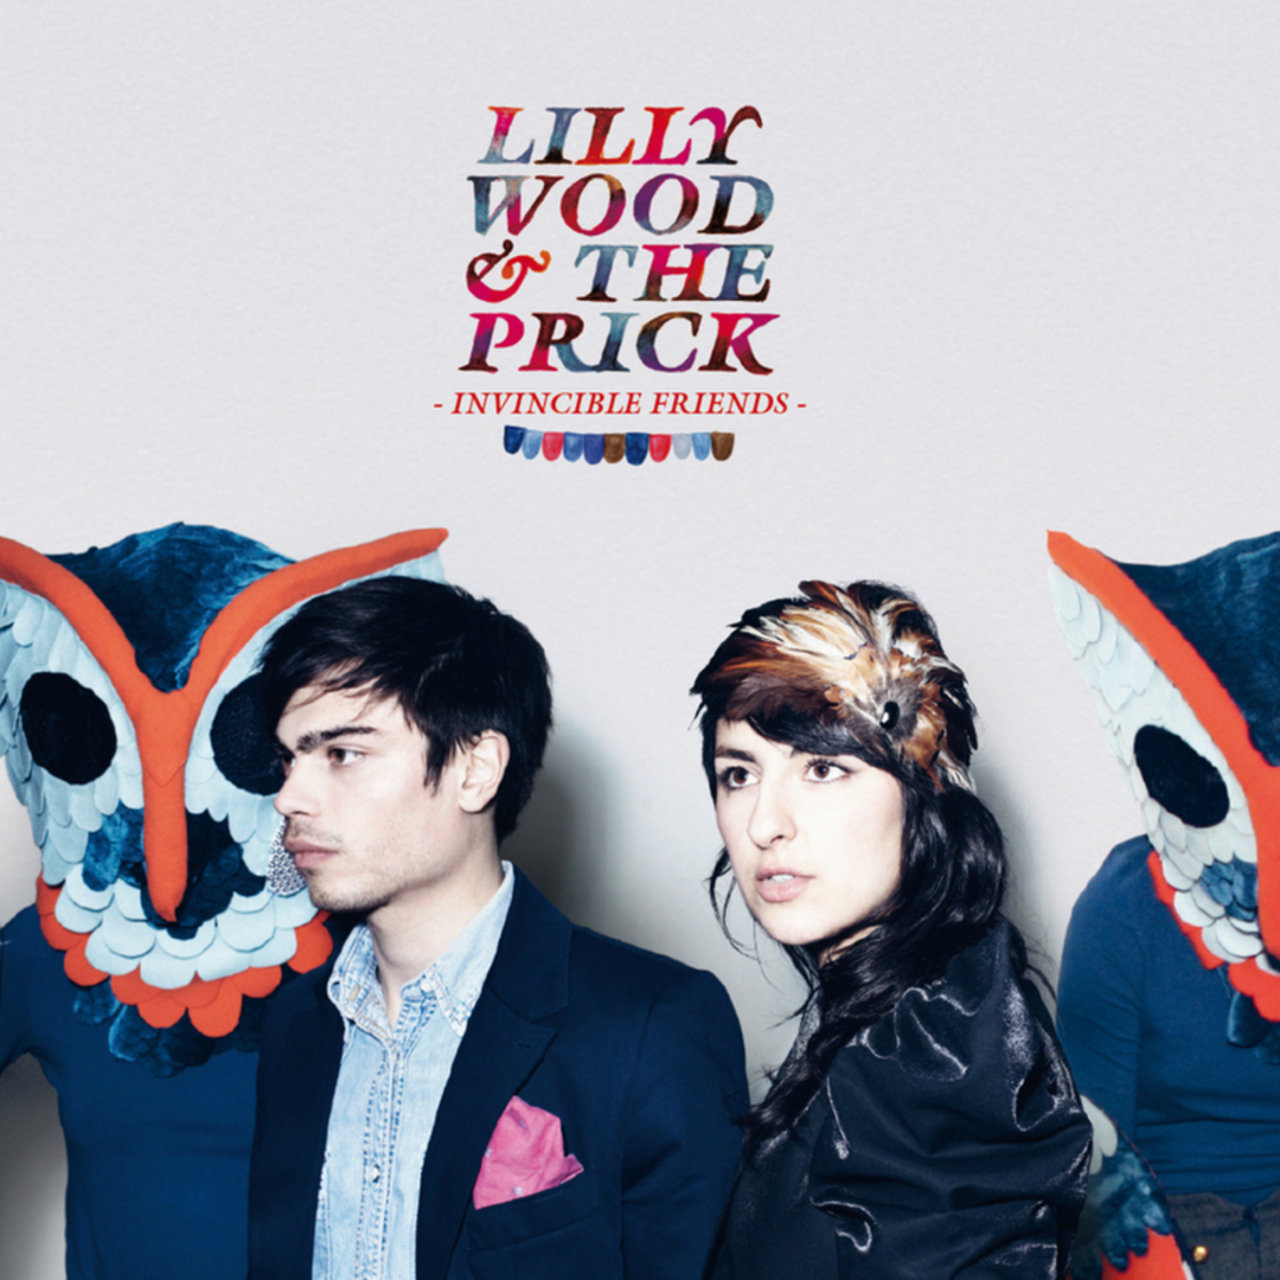 Lilly Wood and The Prick Invincible Friends cover artwork